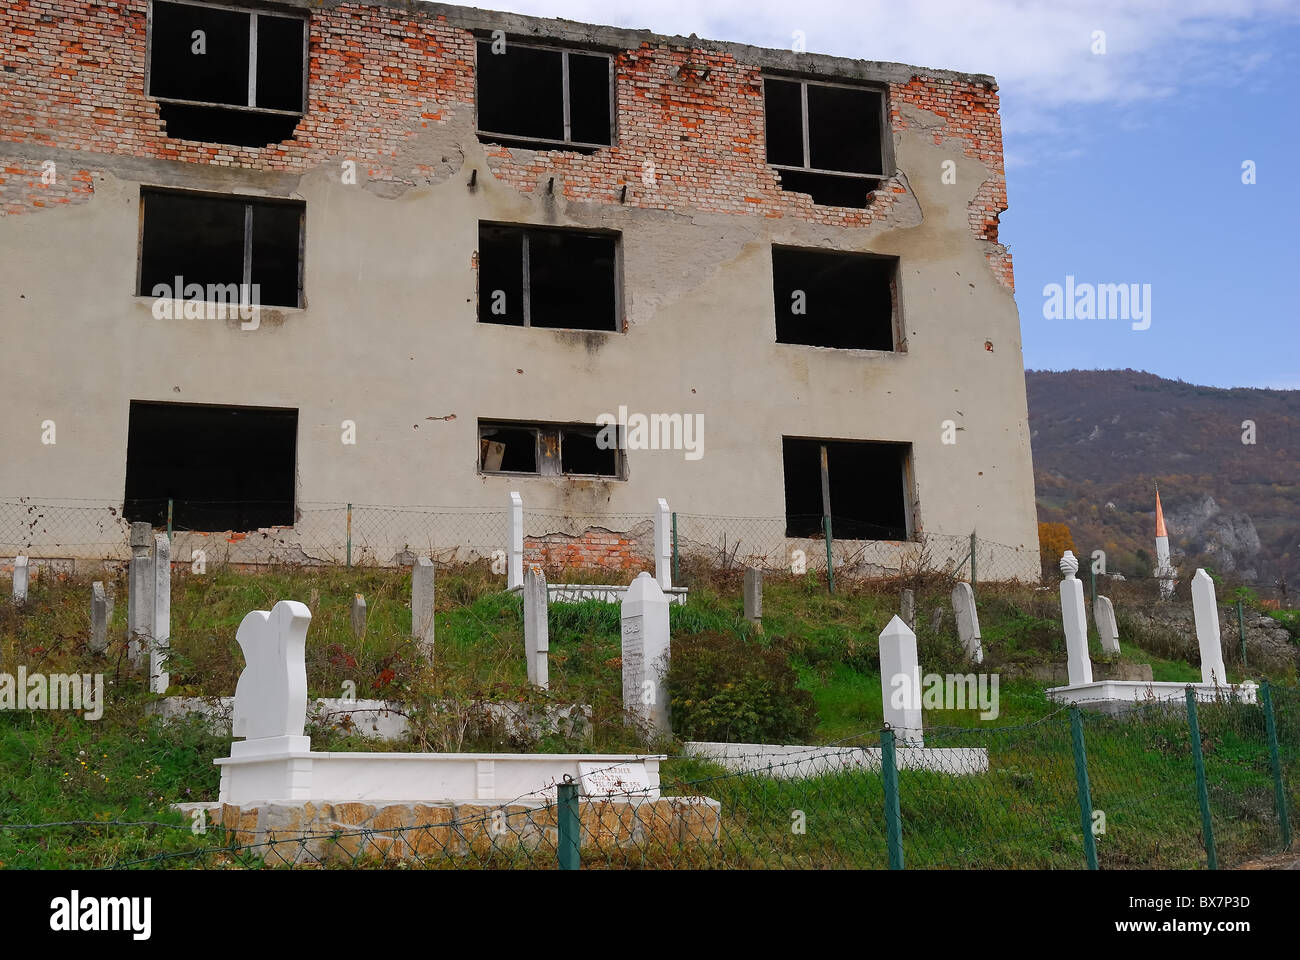 Mededa, Bosnia, muslim houses destroyed by the members of the White Eagles, Serbian paramilitary group. Stock Photo